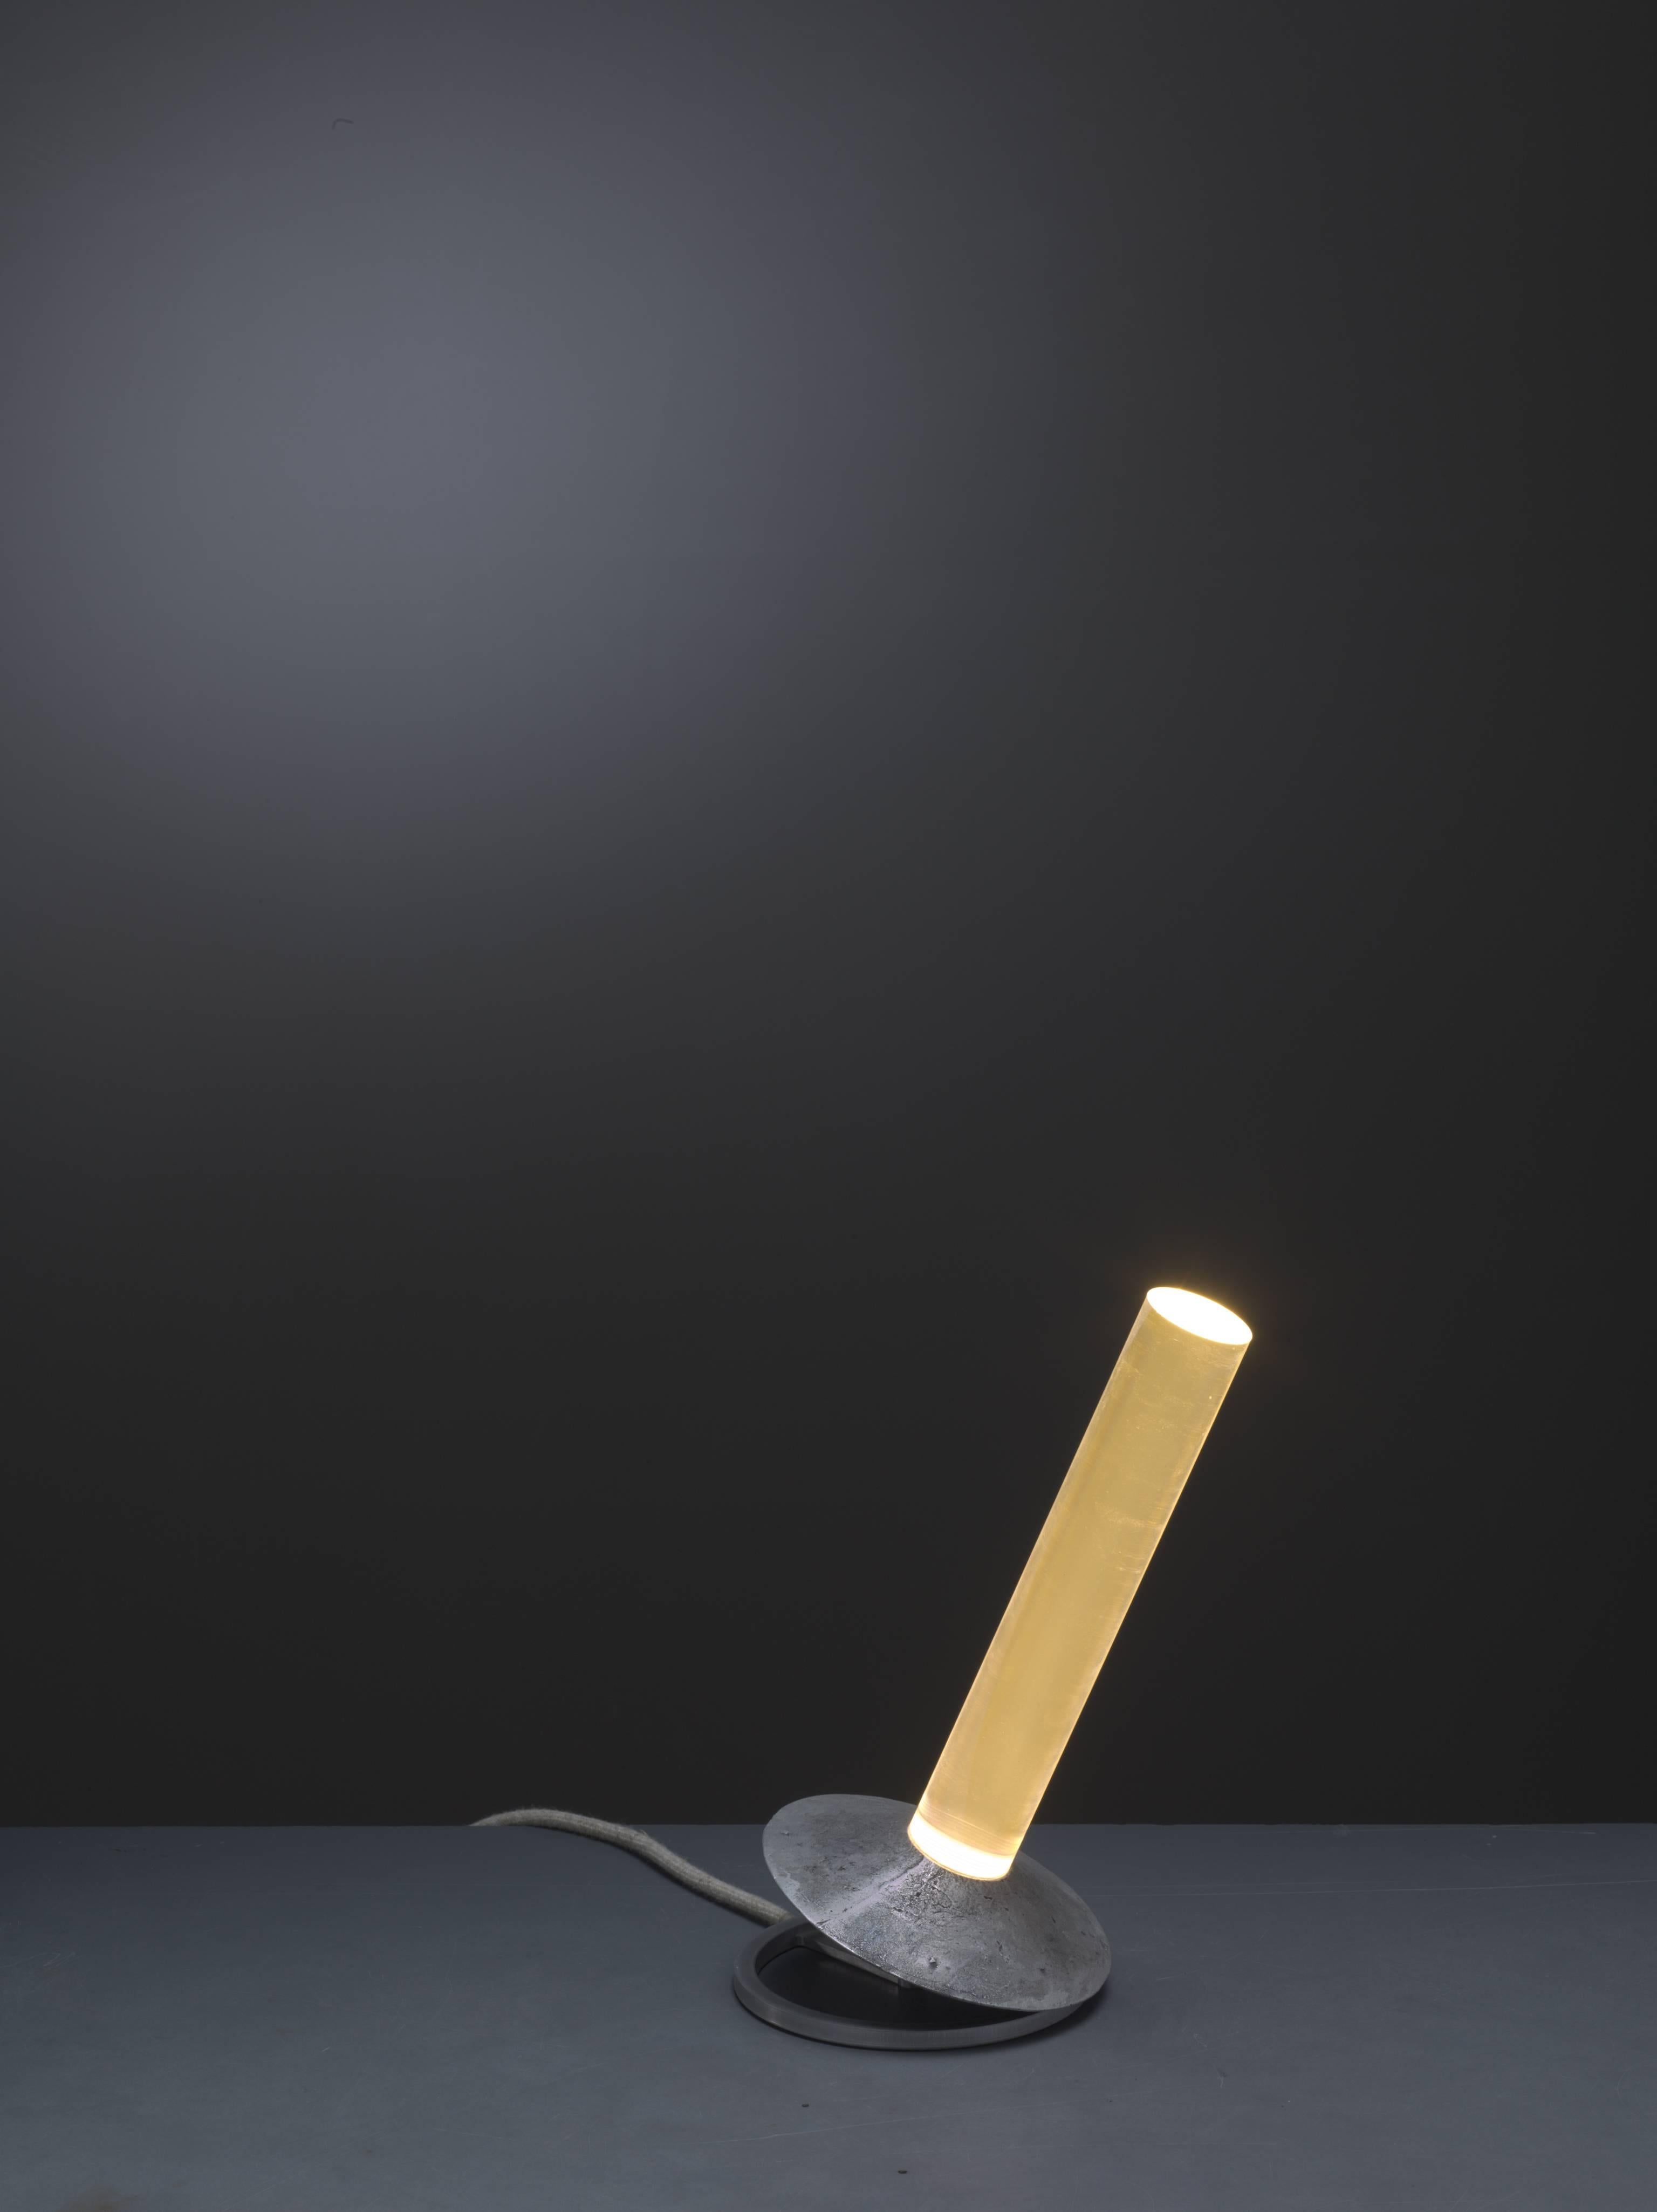 A table lamp by young Dutch designer Roy Wormsbecher. The lamp is made of an aluminum base with an acrylic rod (23.5 cm long and a 4 cm diameter) and fully functioning on led. The aluminium base can turn 360 degrees.

Roy Wormsbecher is a designer